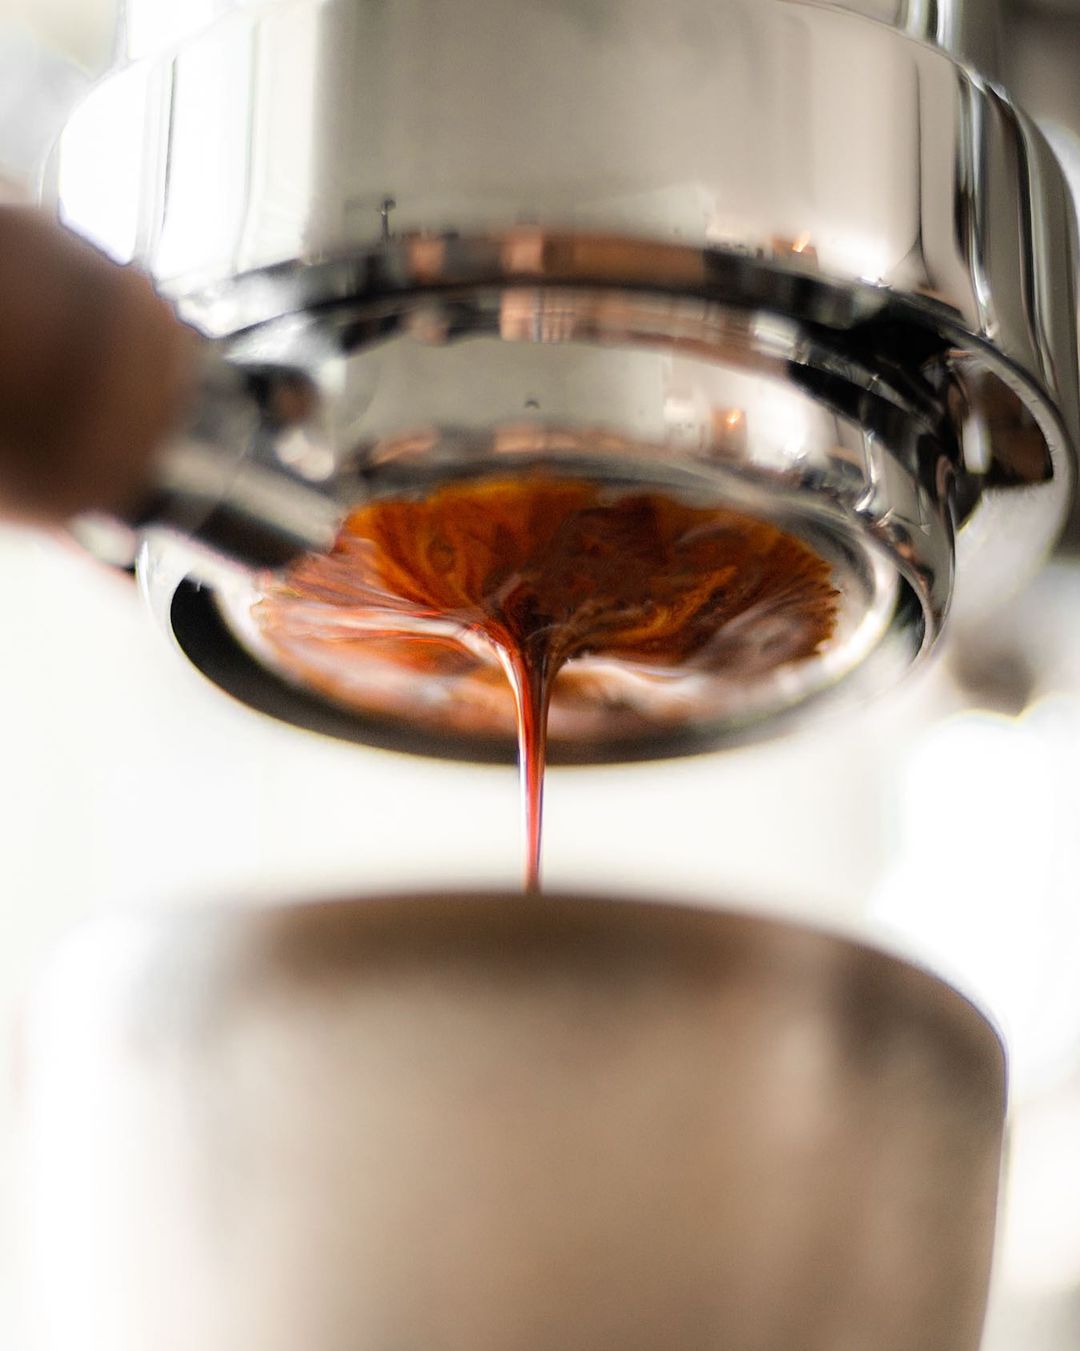 pulling espresso into a cup